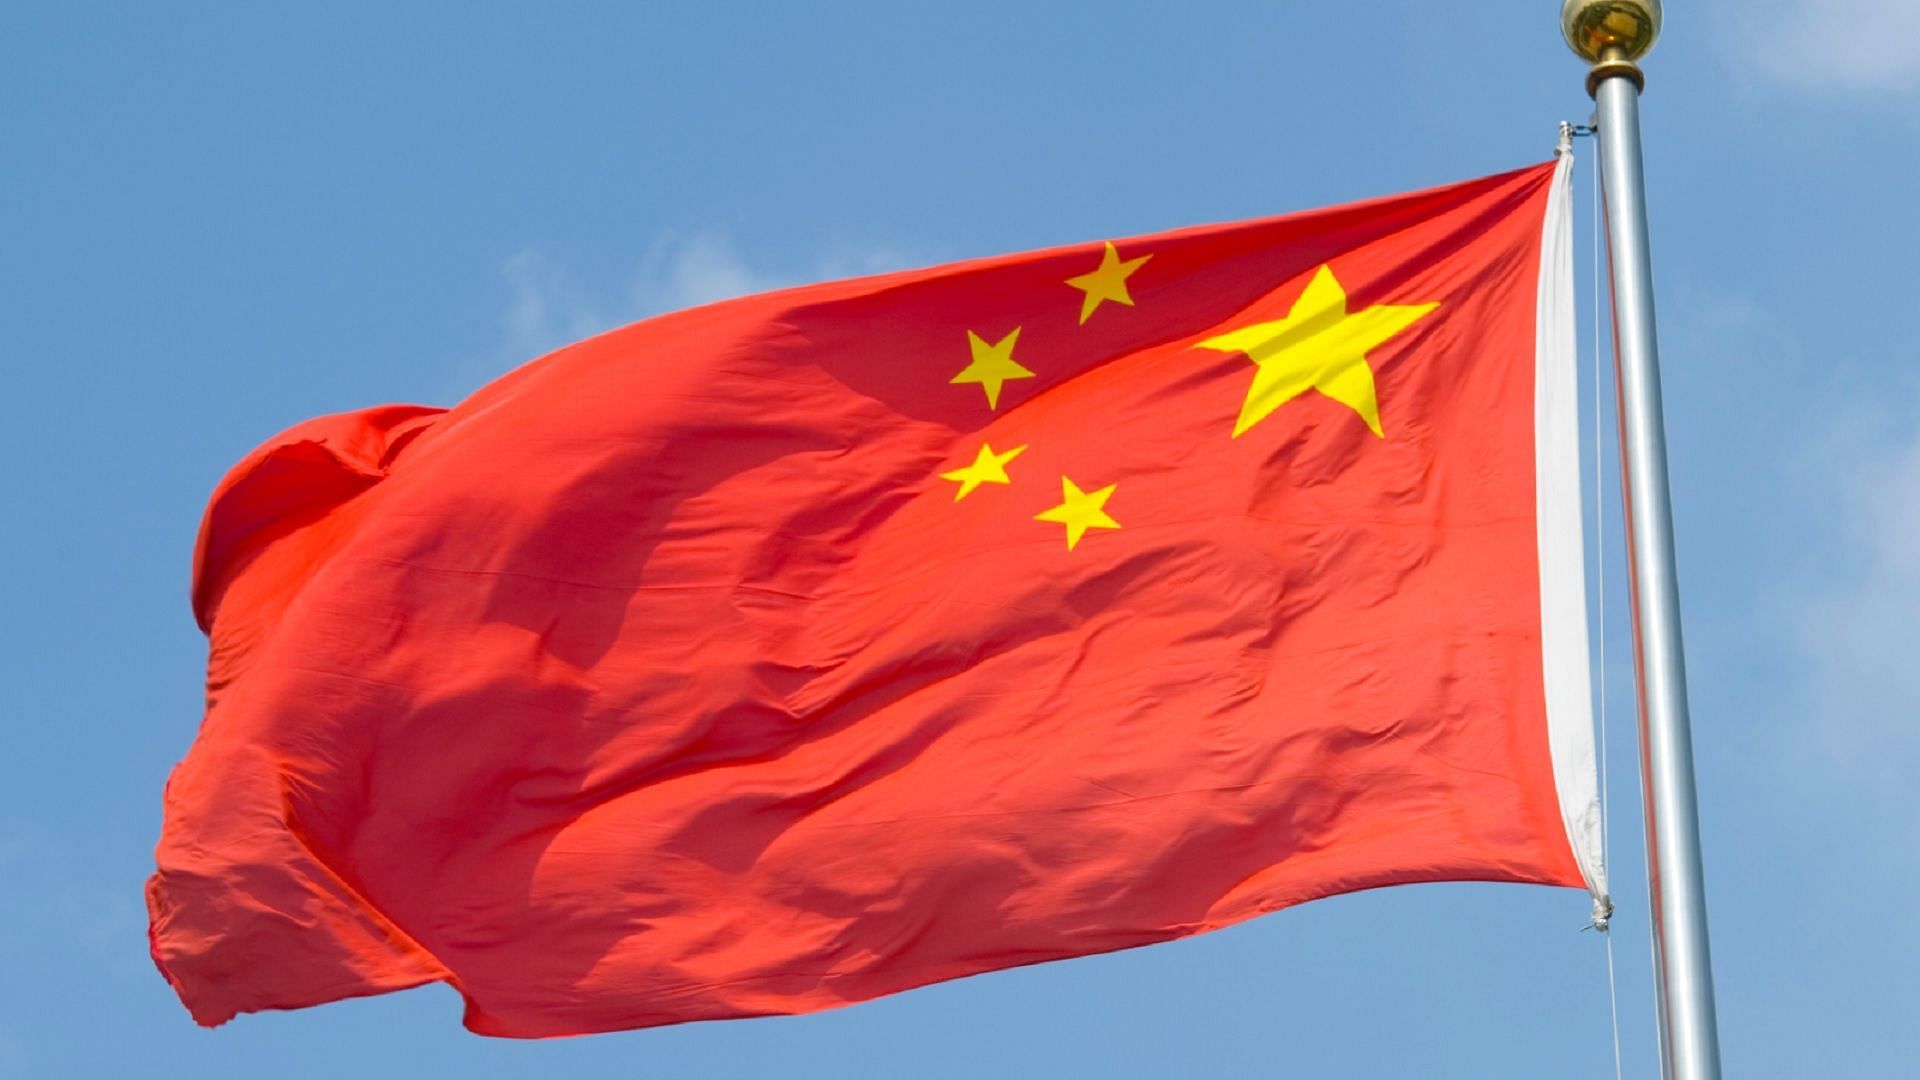  Who shot down the Chinese spy balloon, know facts (Image via Getty Images)